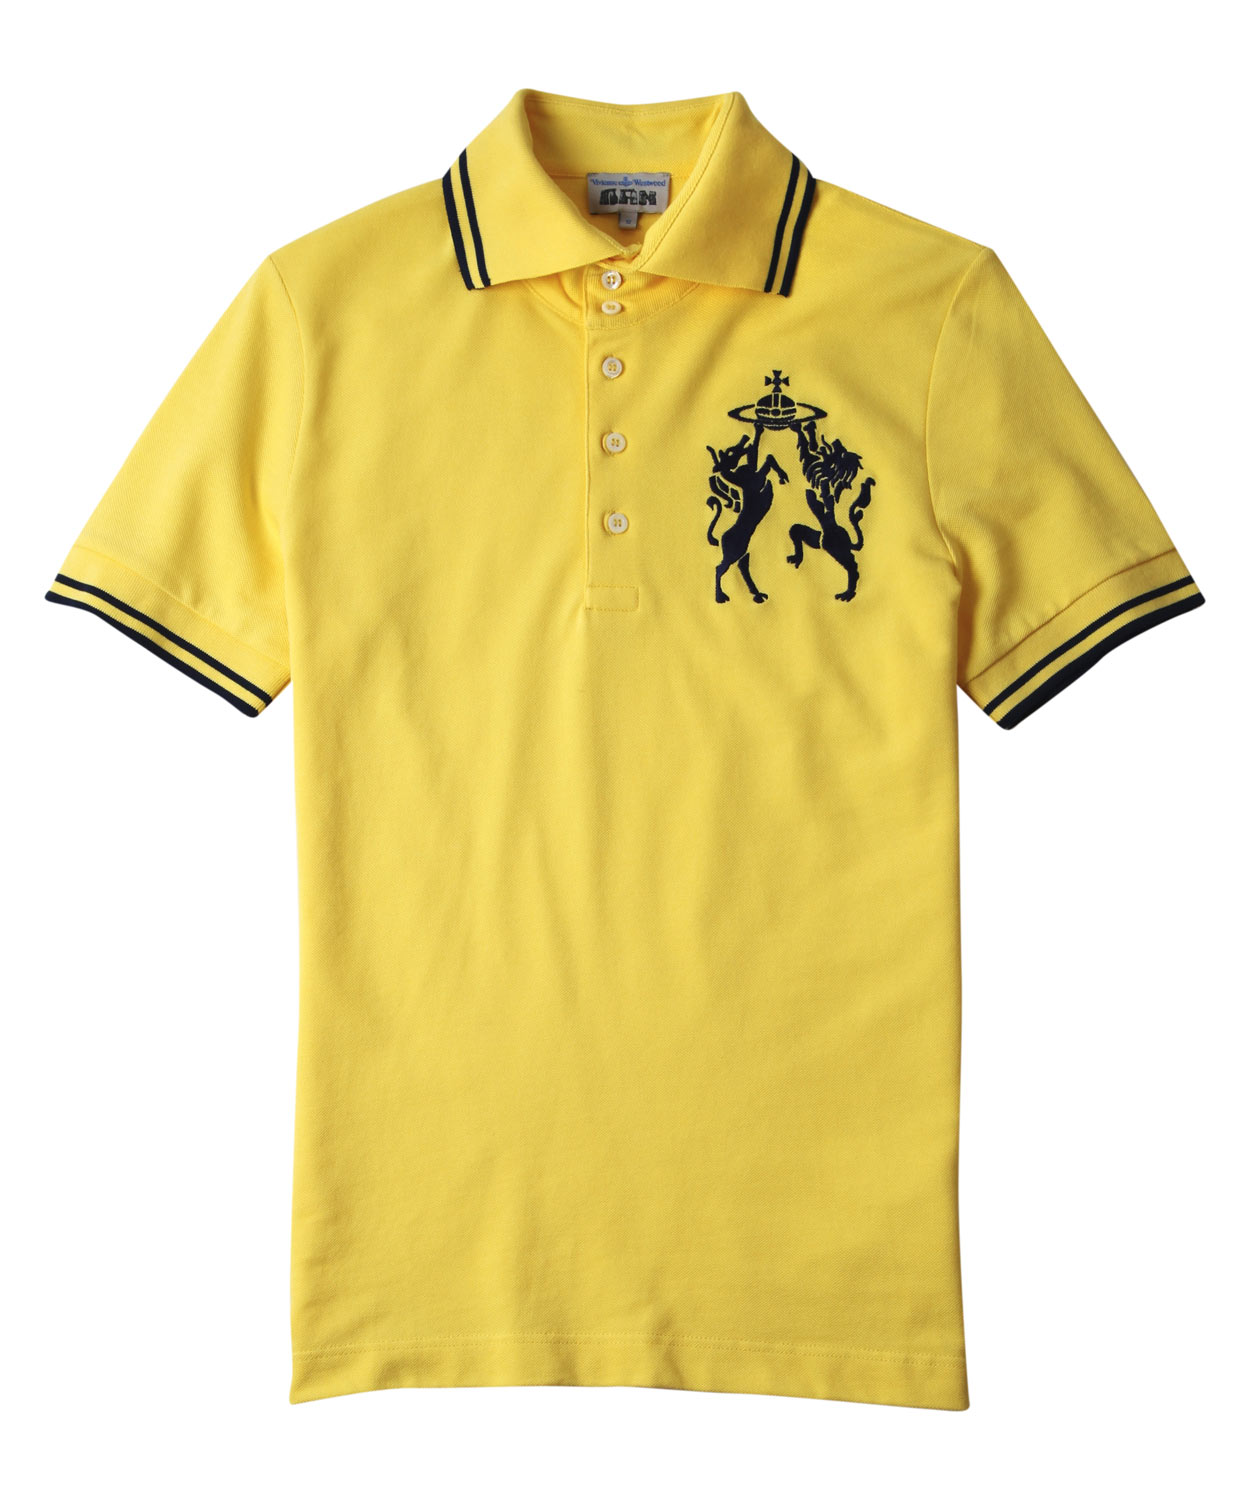 Vivienne Westwood Yellow Lion Orb Polo Shirt for Men - Lyst